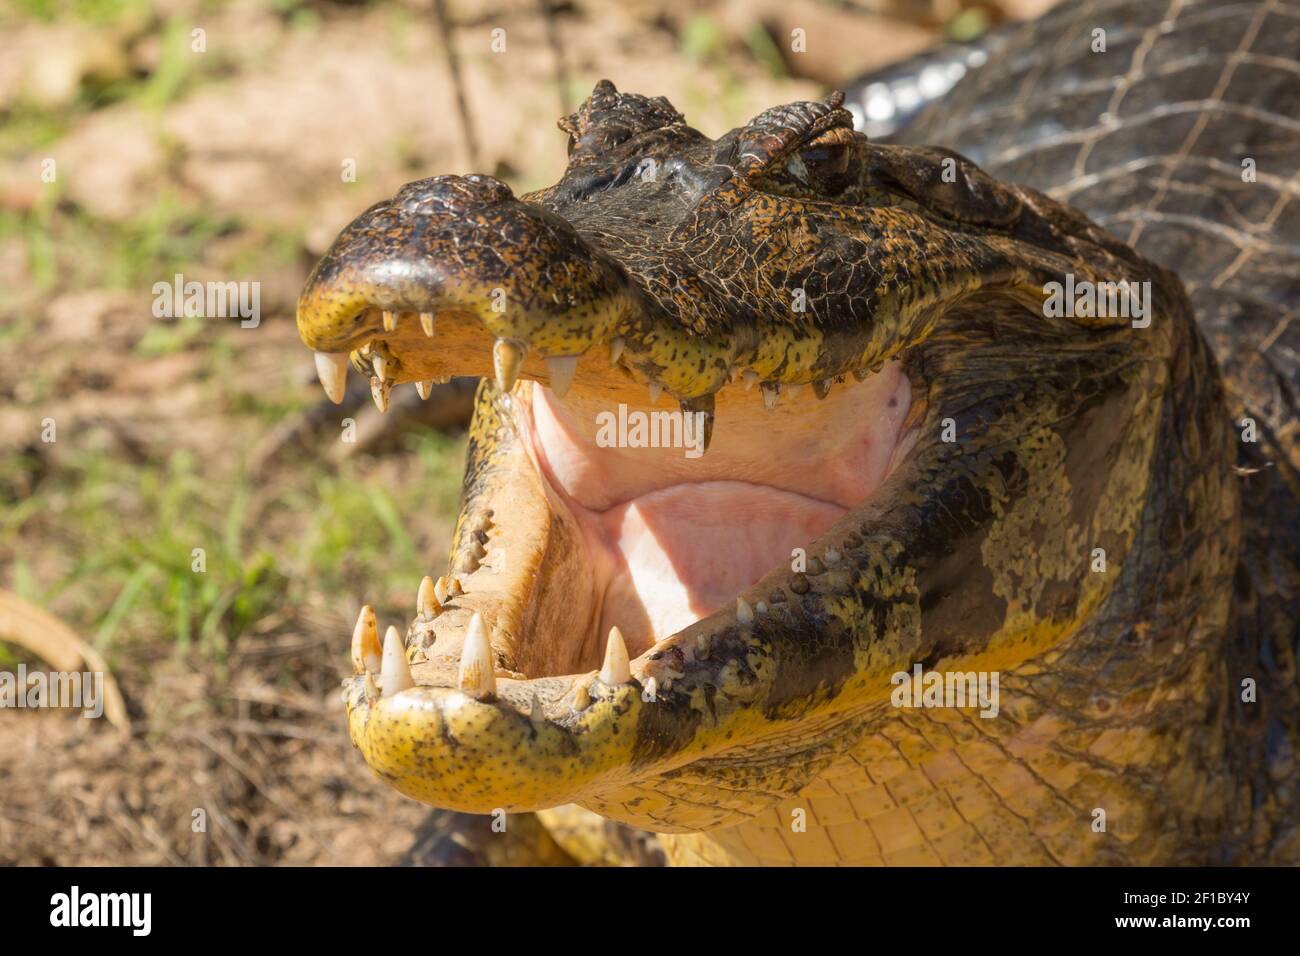 Close up of the head of a Caiman with opened mouth and visible teeth Stock Photo